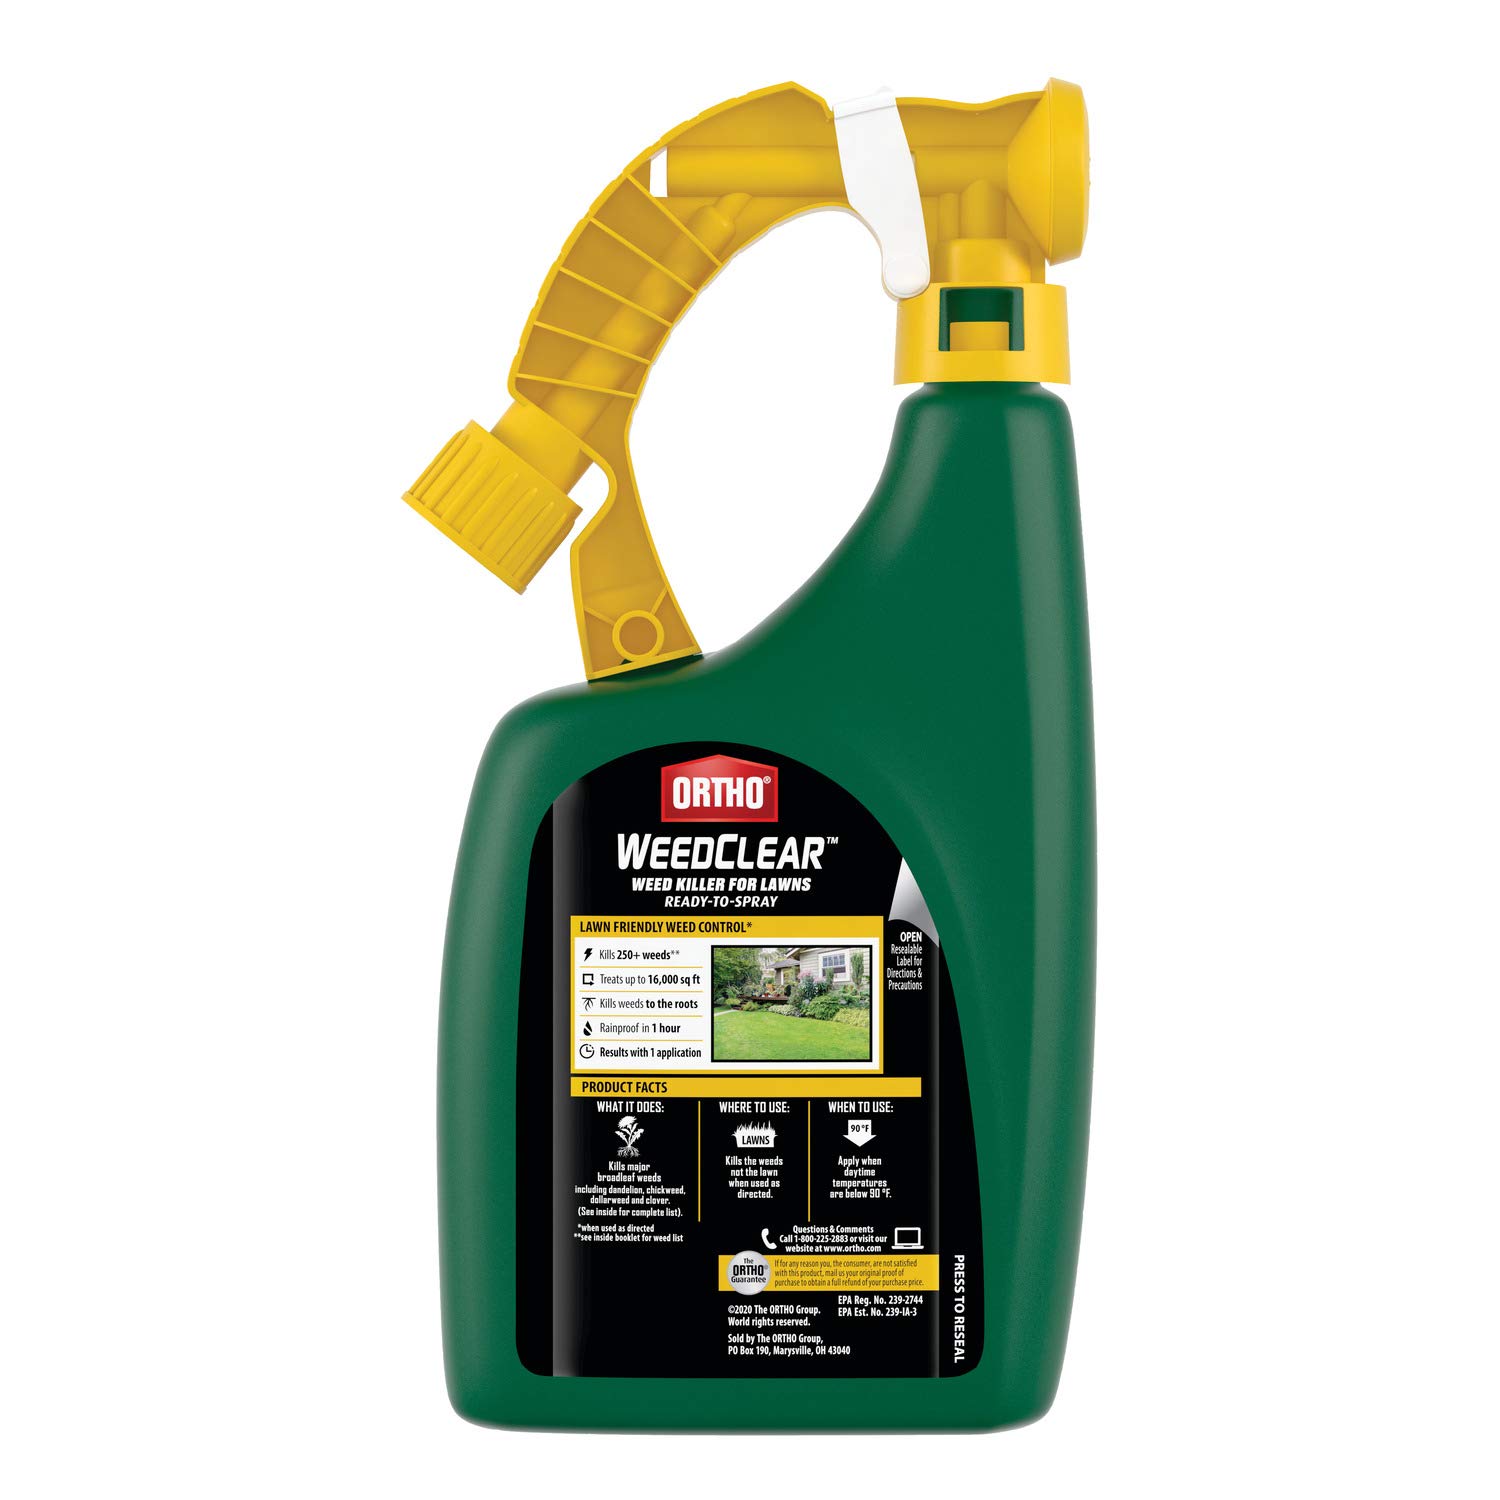 Ortho WeedClear Weed Killer for Lawns Ready-To-Spray: Treats up to 16,000 sq. ft.,, Kills Dandelion & Clover, 32 oz. $11.99. Free Shipping w/ S&S or purchase of $25+